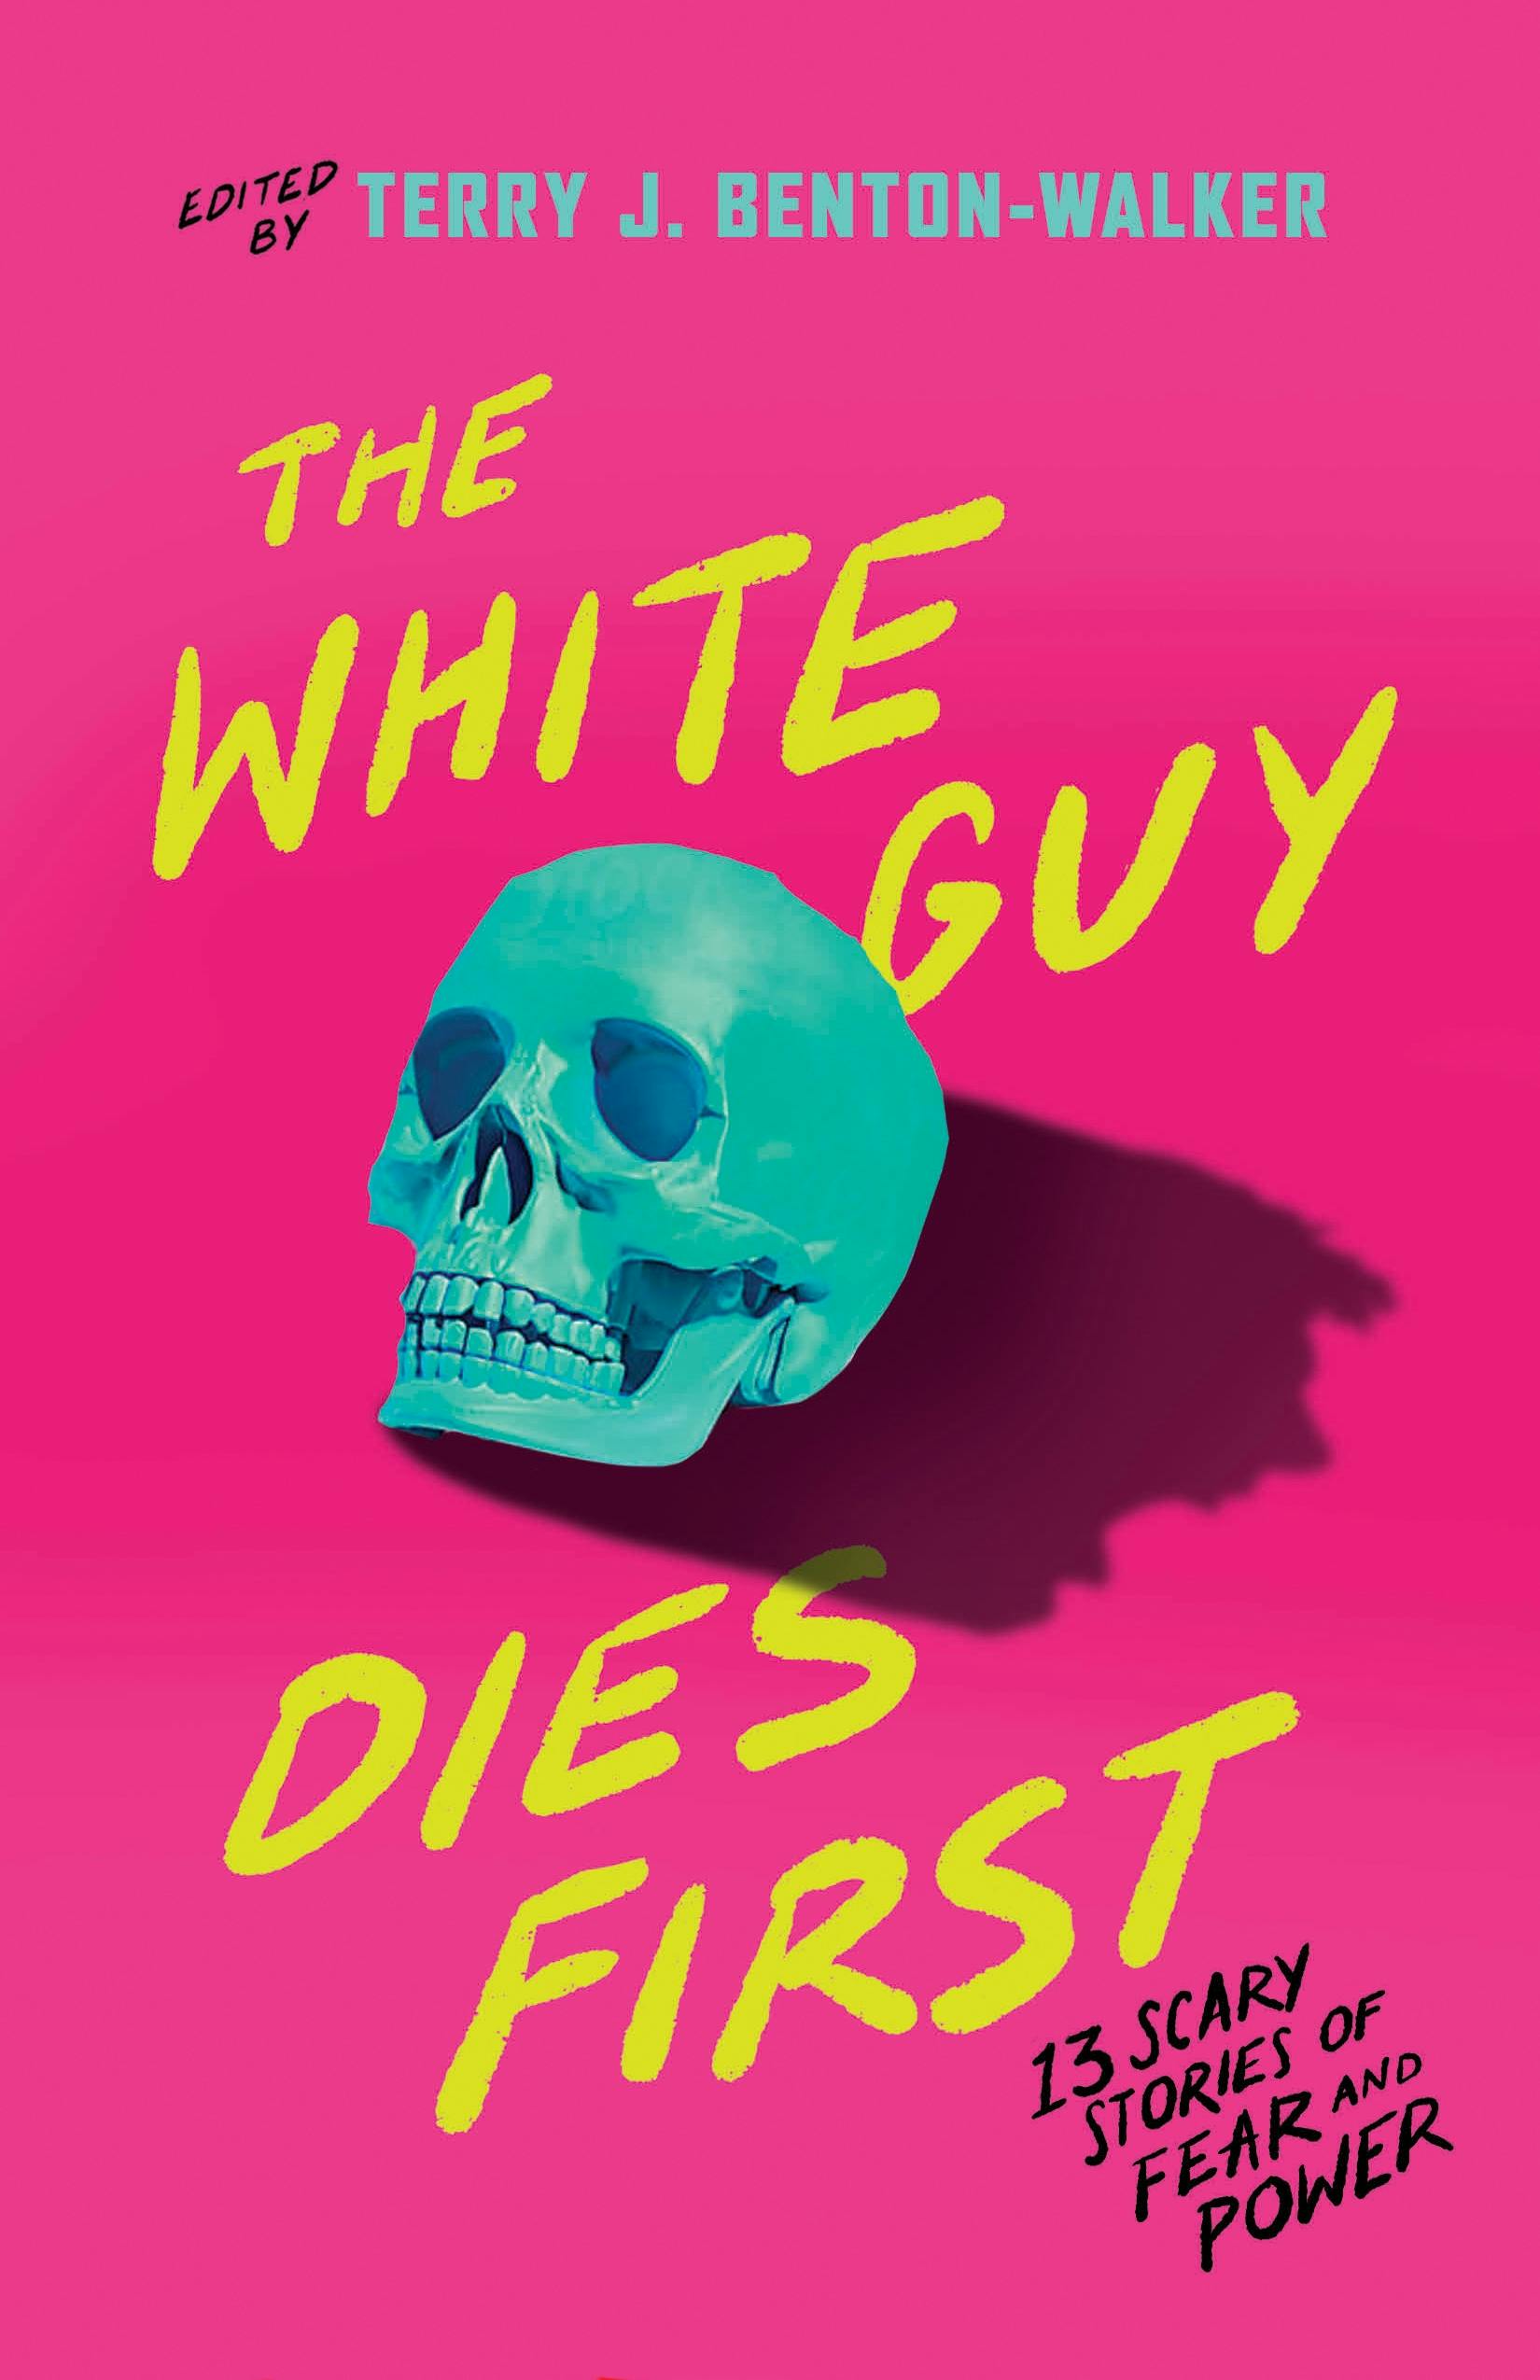 Cover for the book titled as: The White Guy Dies First